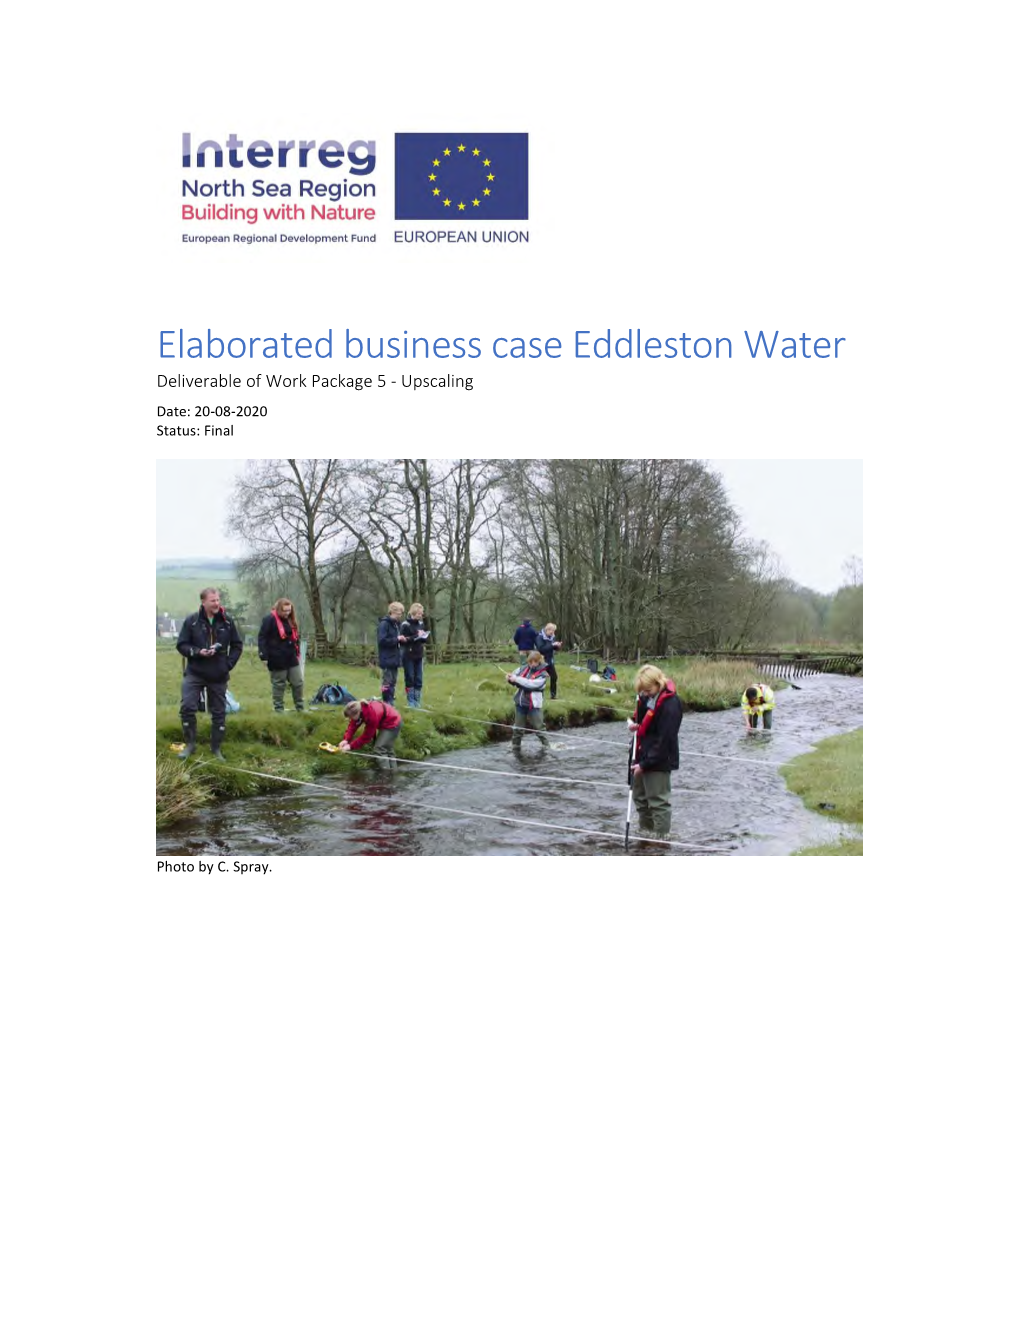 Elaborated Business Case Eddleston Water Deliverable of Work Package 5 - Upscaling Date: 20-08-2020 Status: Final